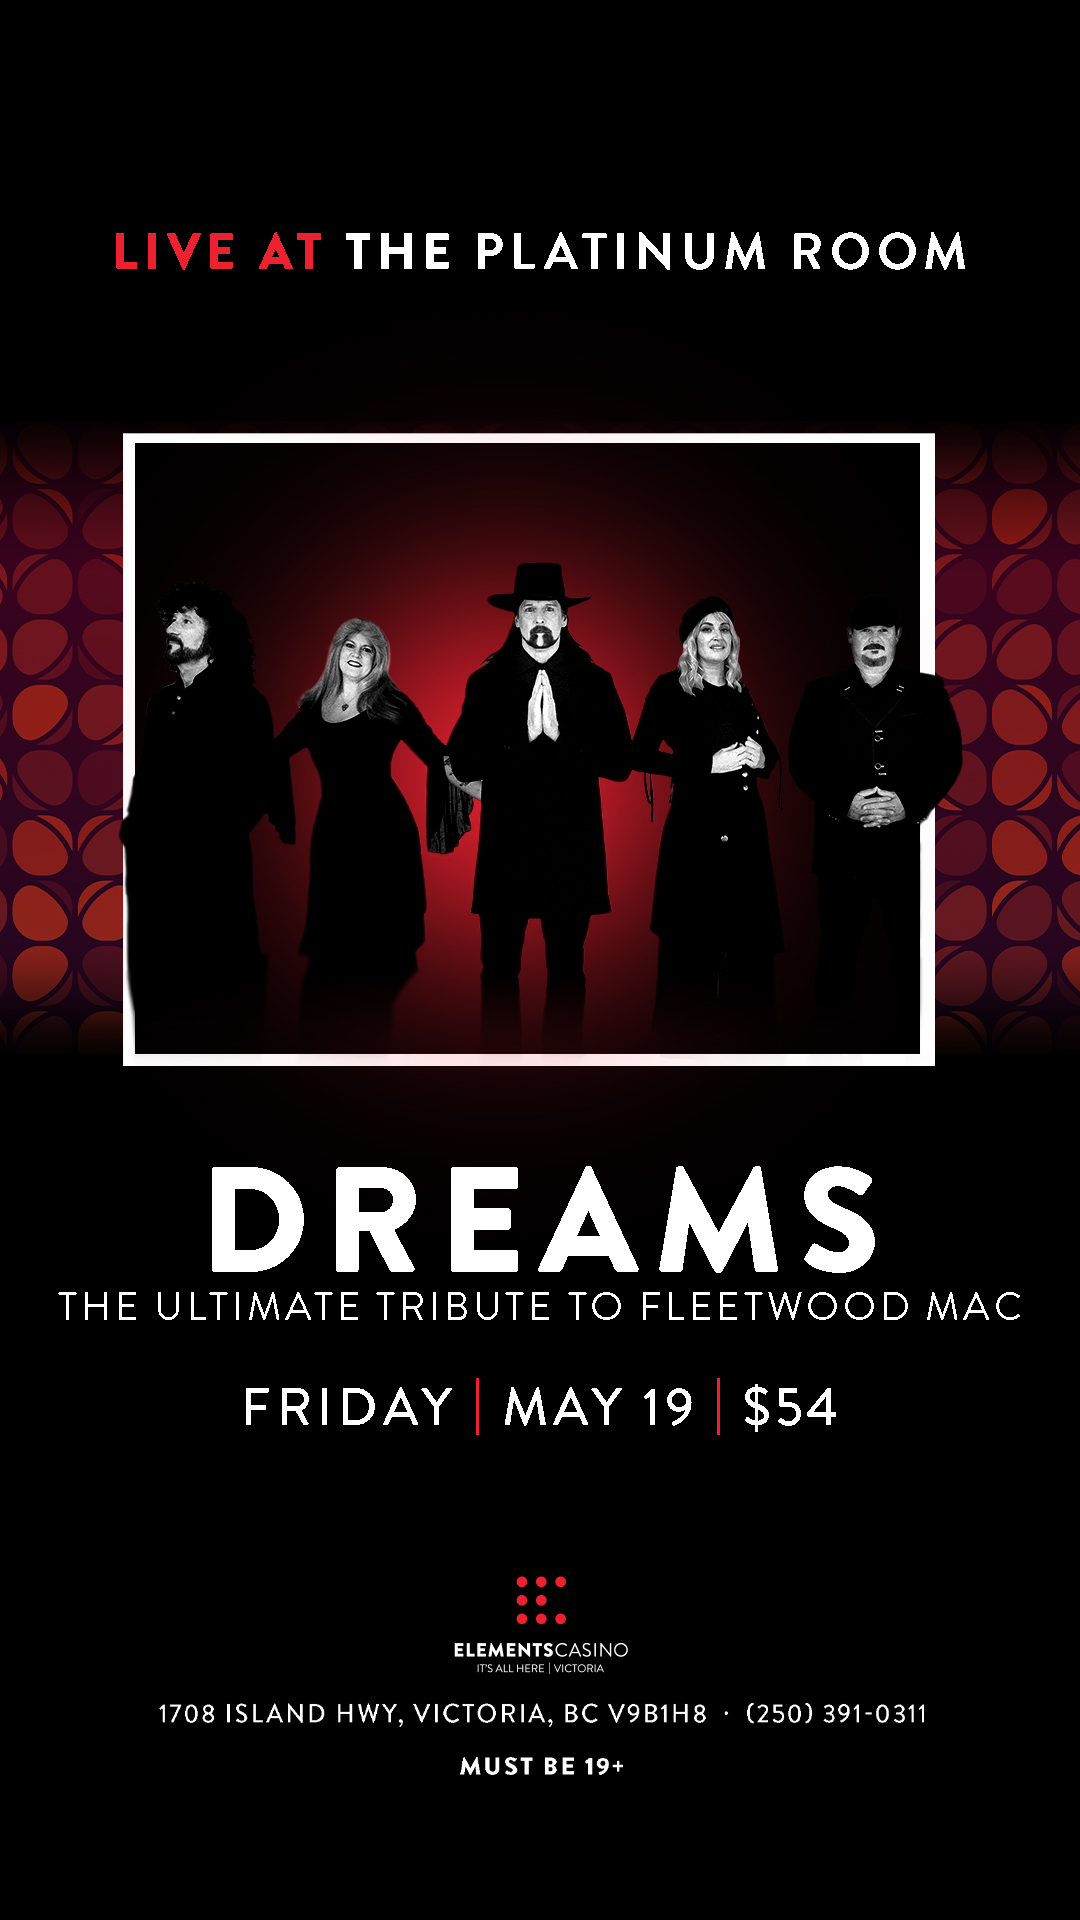 DREAMS - The Ultimate Tribute to Fleetwood Mac